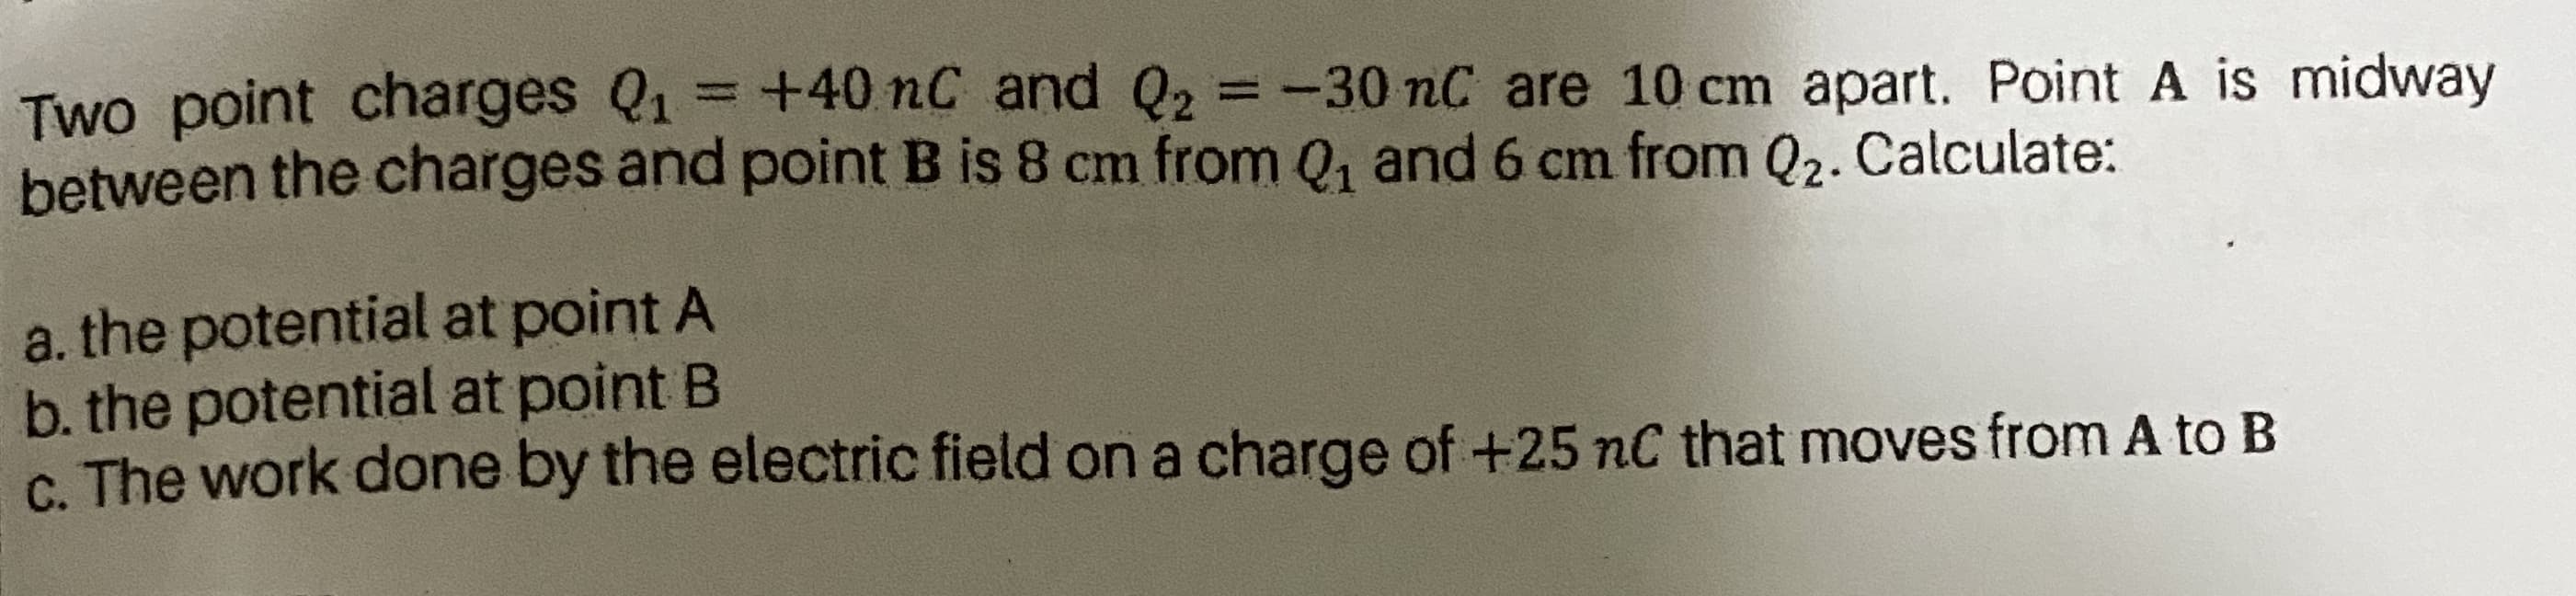 Two point charges Q1= +40 nC and Q2 =-30 nC are 10 cm apart. Point A is midway
between the charges and point B is 8 cm from Q, and 6 cm from Q2. Calculate:
%3D
a. the potential at point A
b. the potential at point B
c. The work done by the electric field on a charge of +25 nC that moves from A to B
